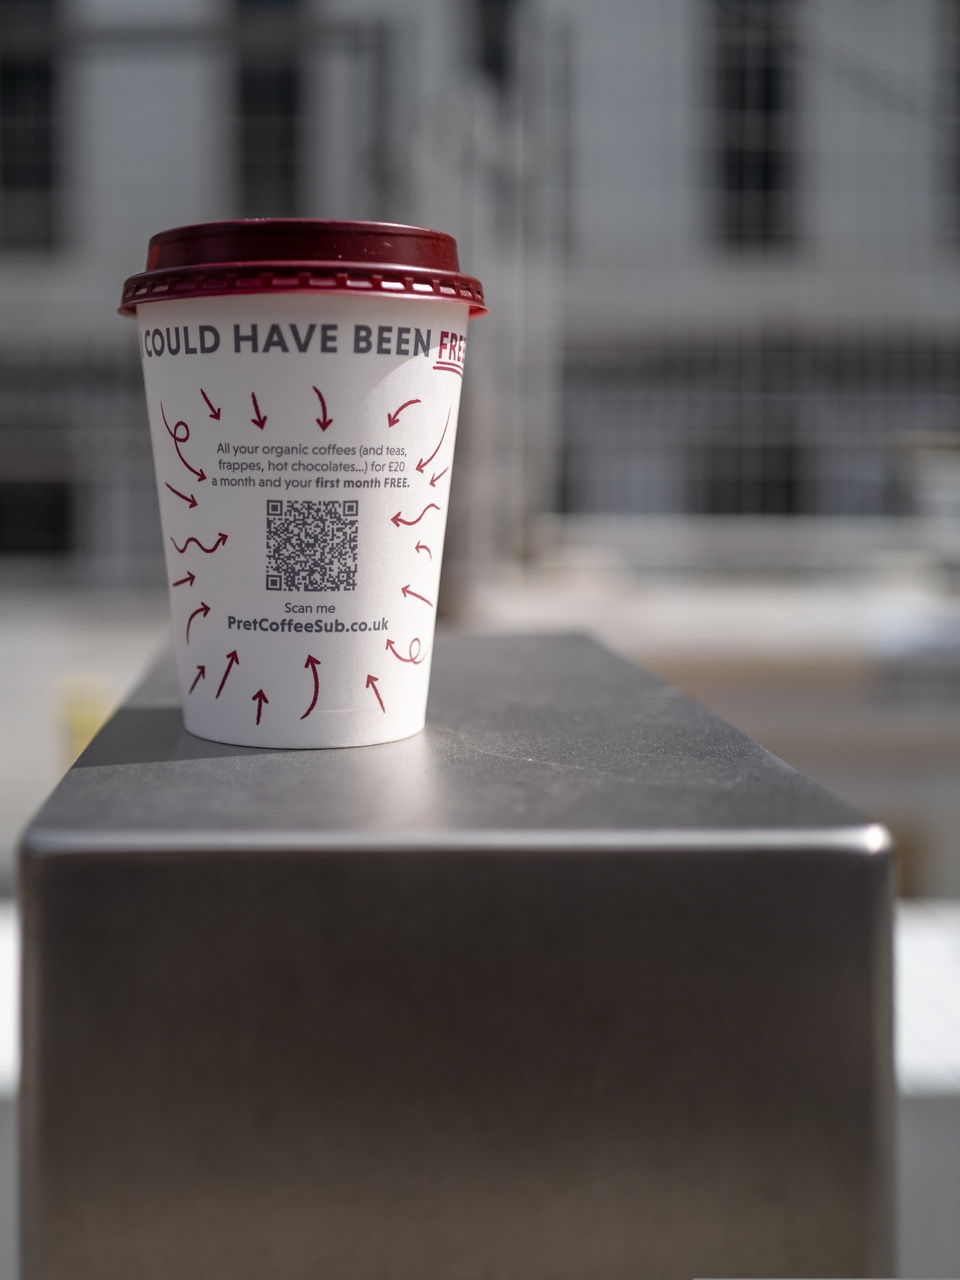 a paper coffee cup with a QR code on it